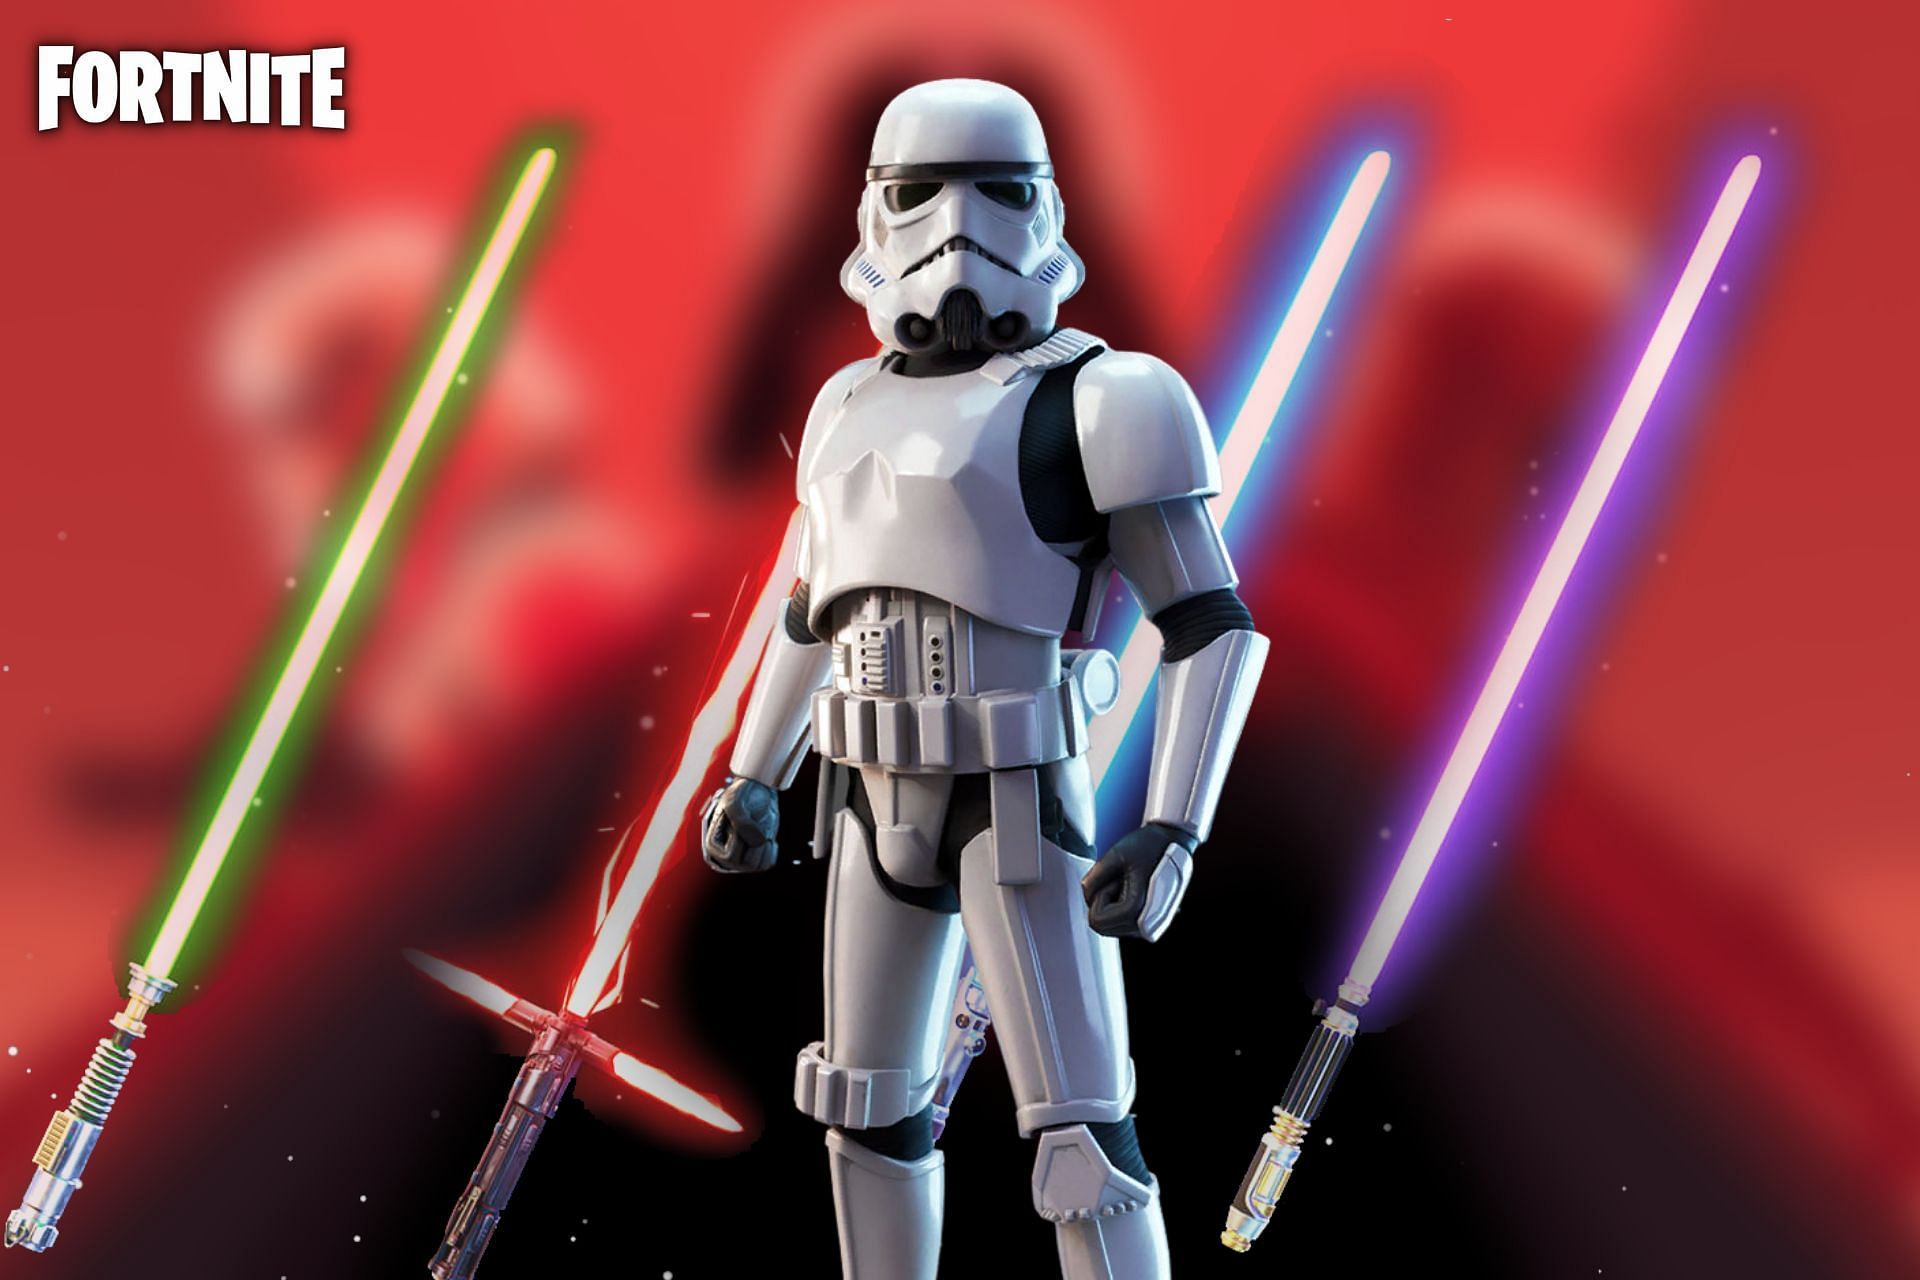 Lightsabers and Imperial Storm Trooper NPCS from Star Wars may return to Fortnite (Image via Sportskeeda)